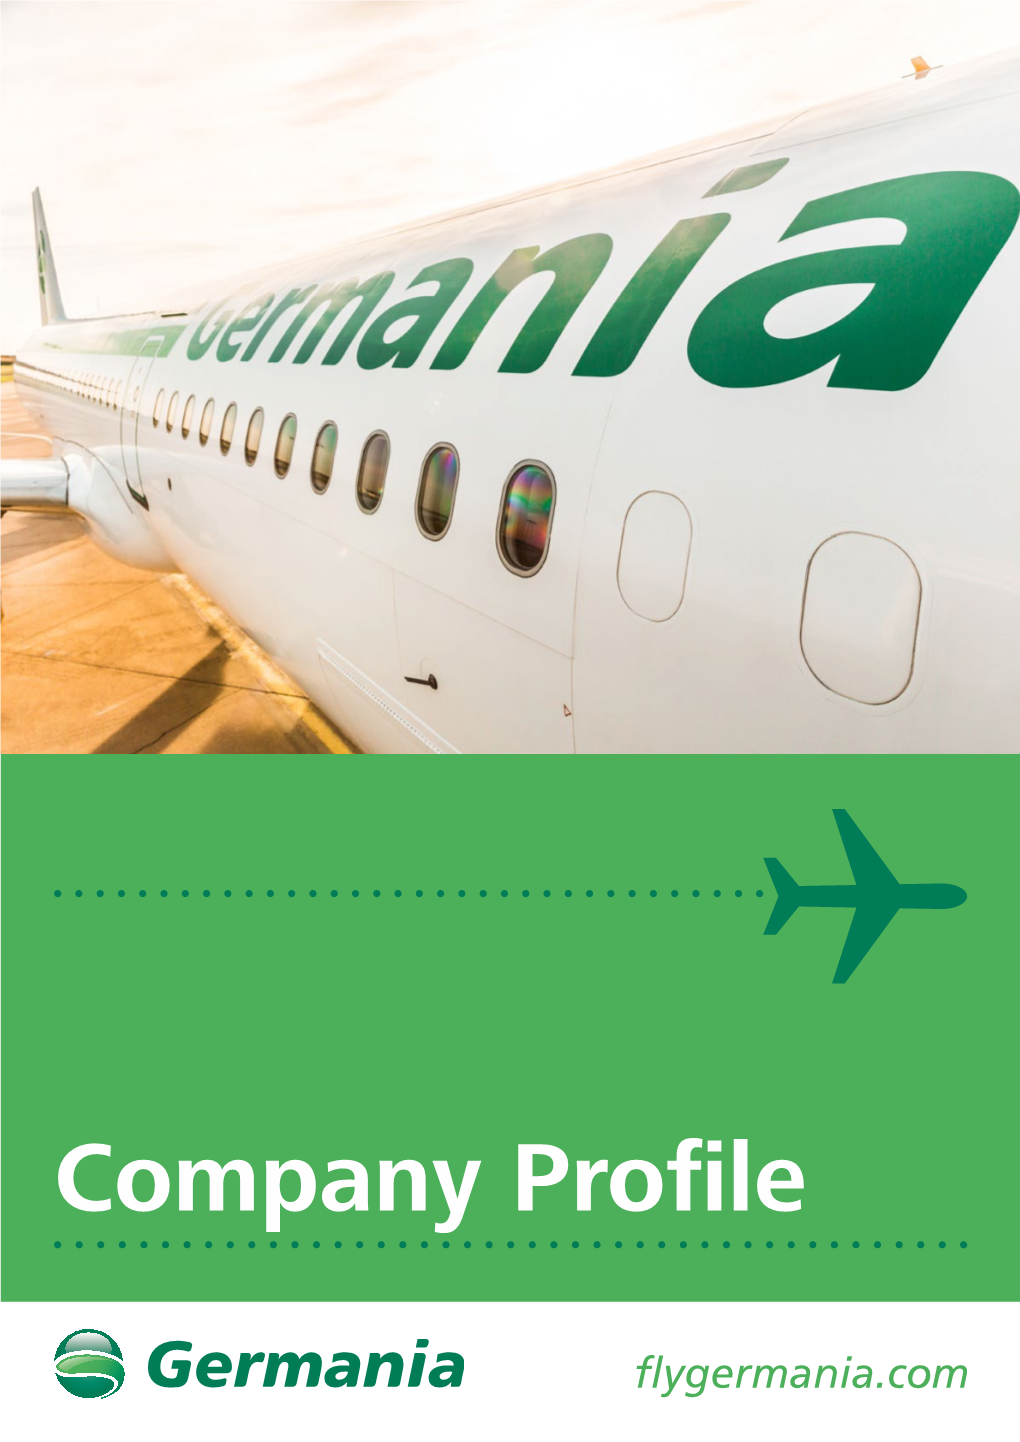 Company Profile More Than Four Million Germania Passengers a Year European Network